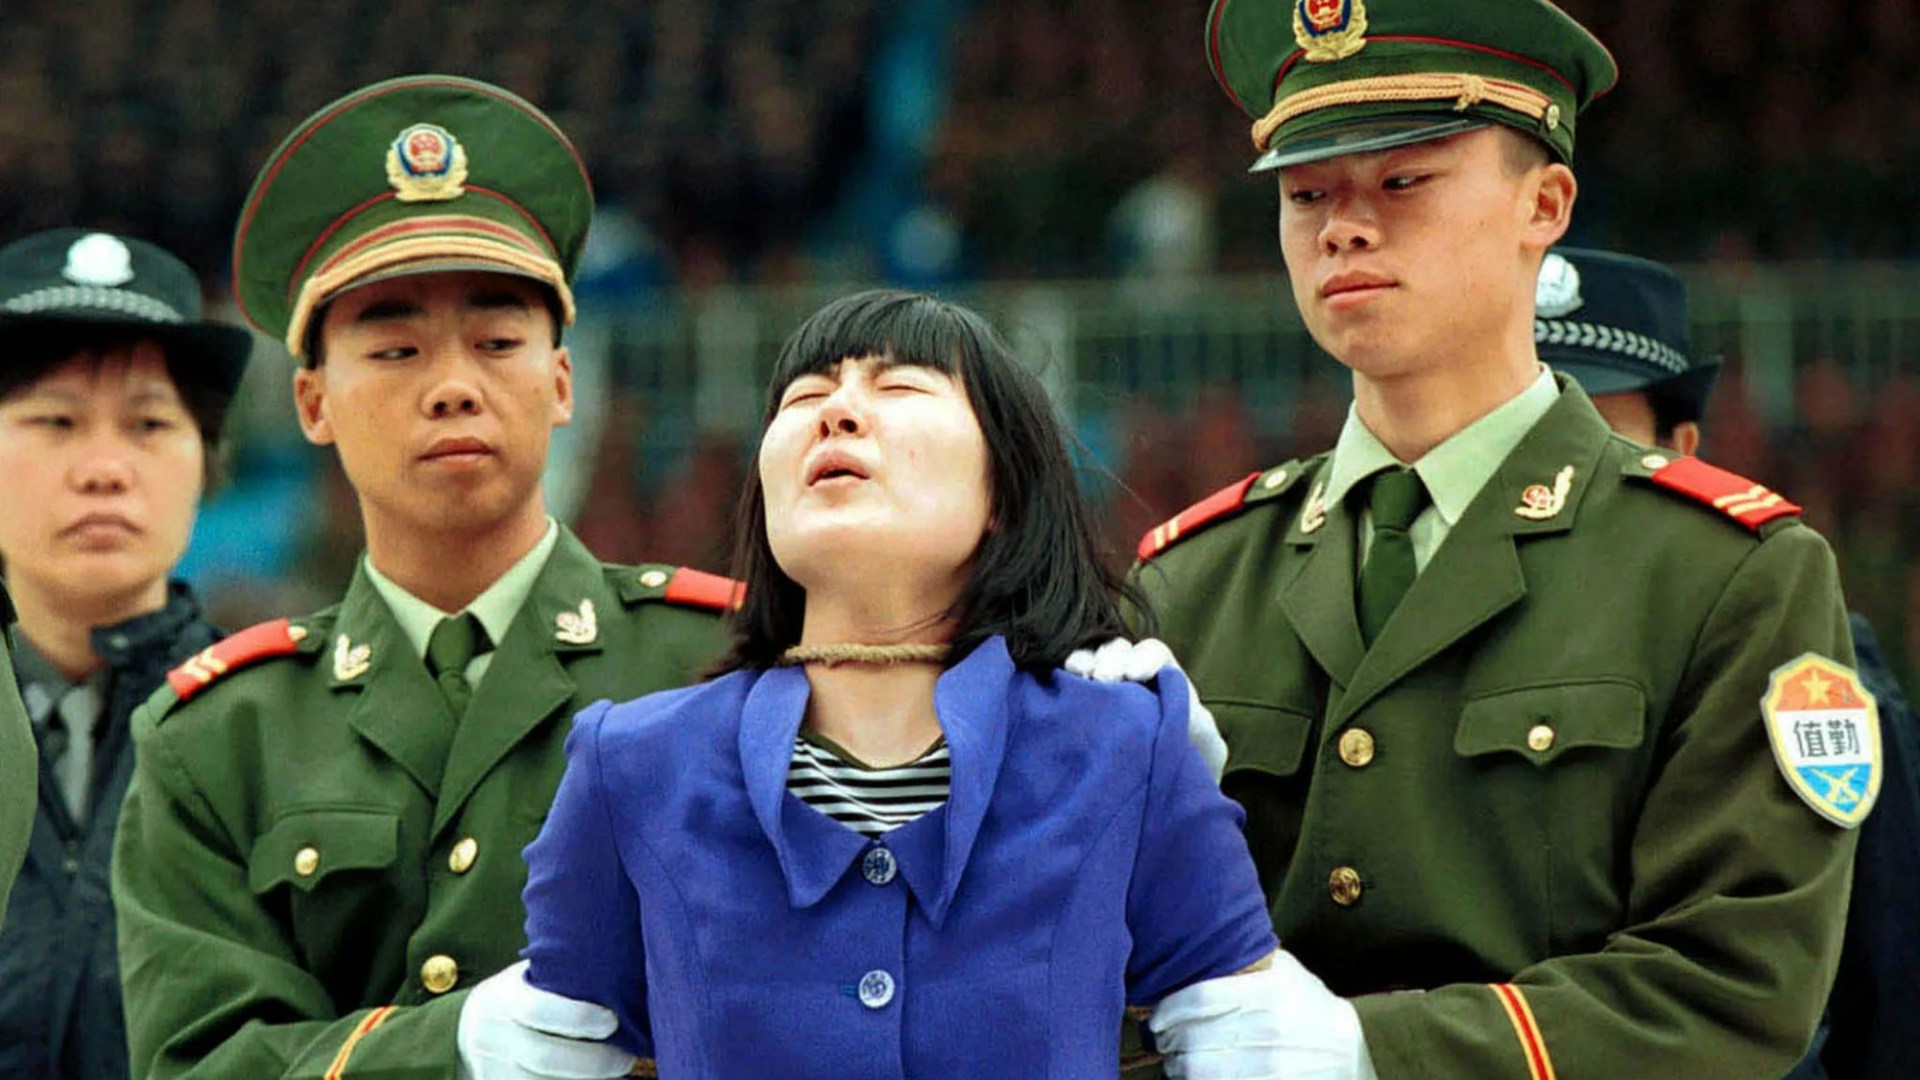 Worlds DEADLIEST year for executions in 2023 led by China where thousands are slaughtered for stepping out of line [Video]